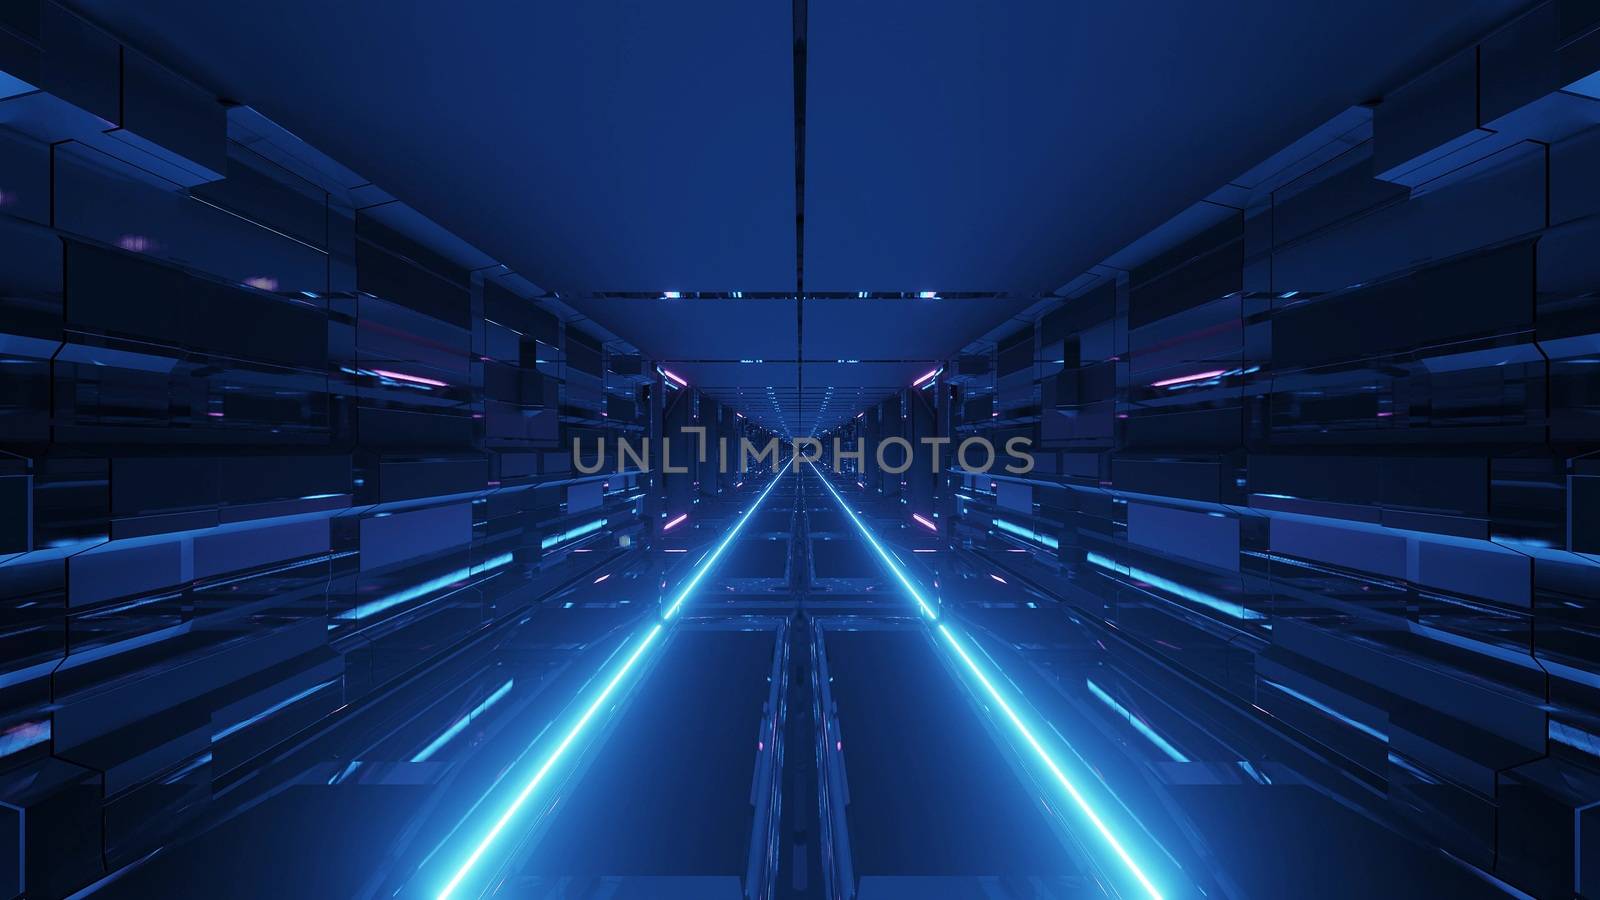 futuristic technical science-fiction tunnel corridor with endless glowing lights 3d illustration background wallpaper graphic artwork by tunnelmotions